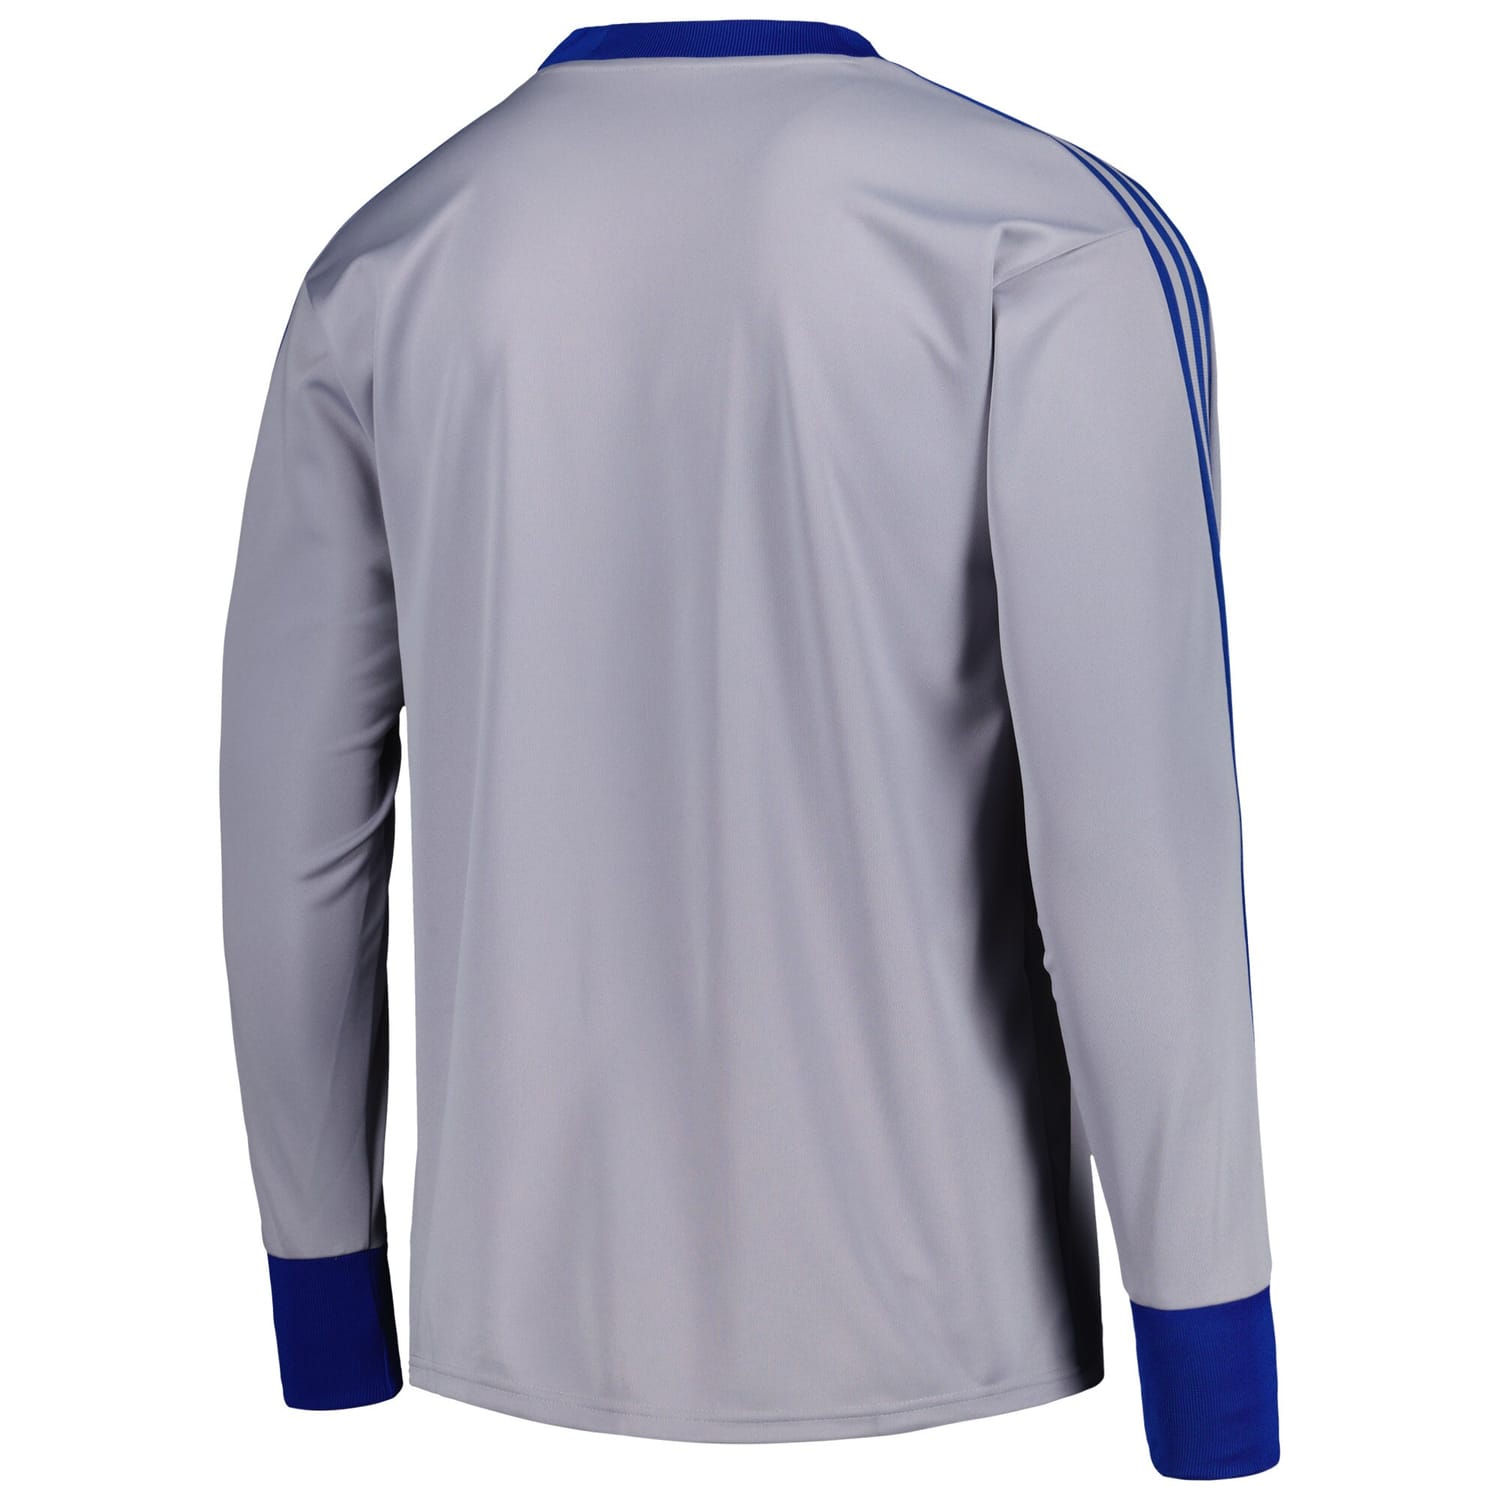 Italy National Team Goalkeeper Authentic Jersey Shirt Gray for Men